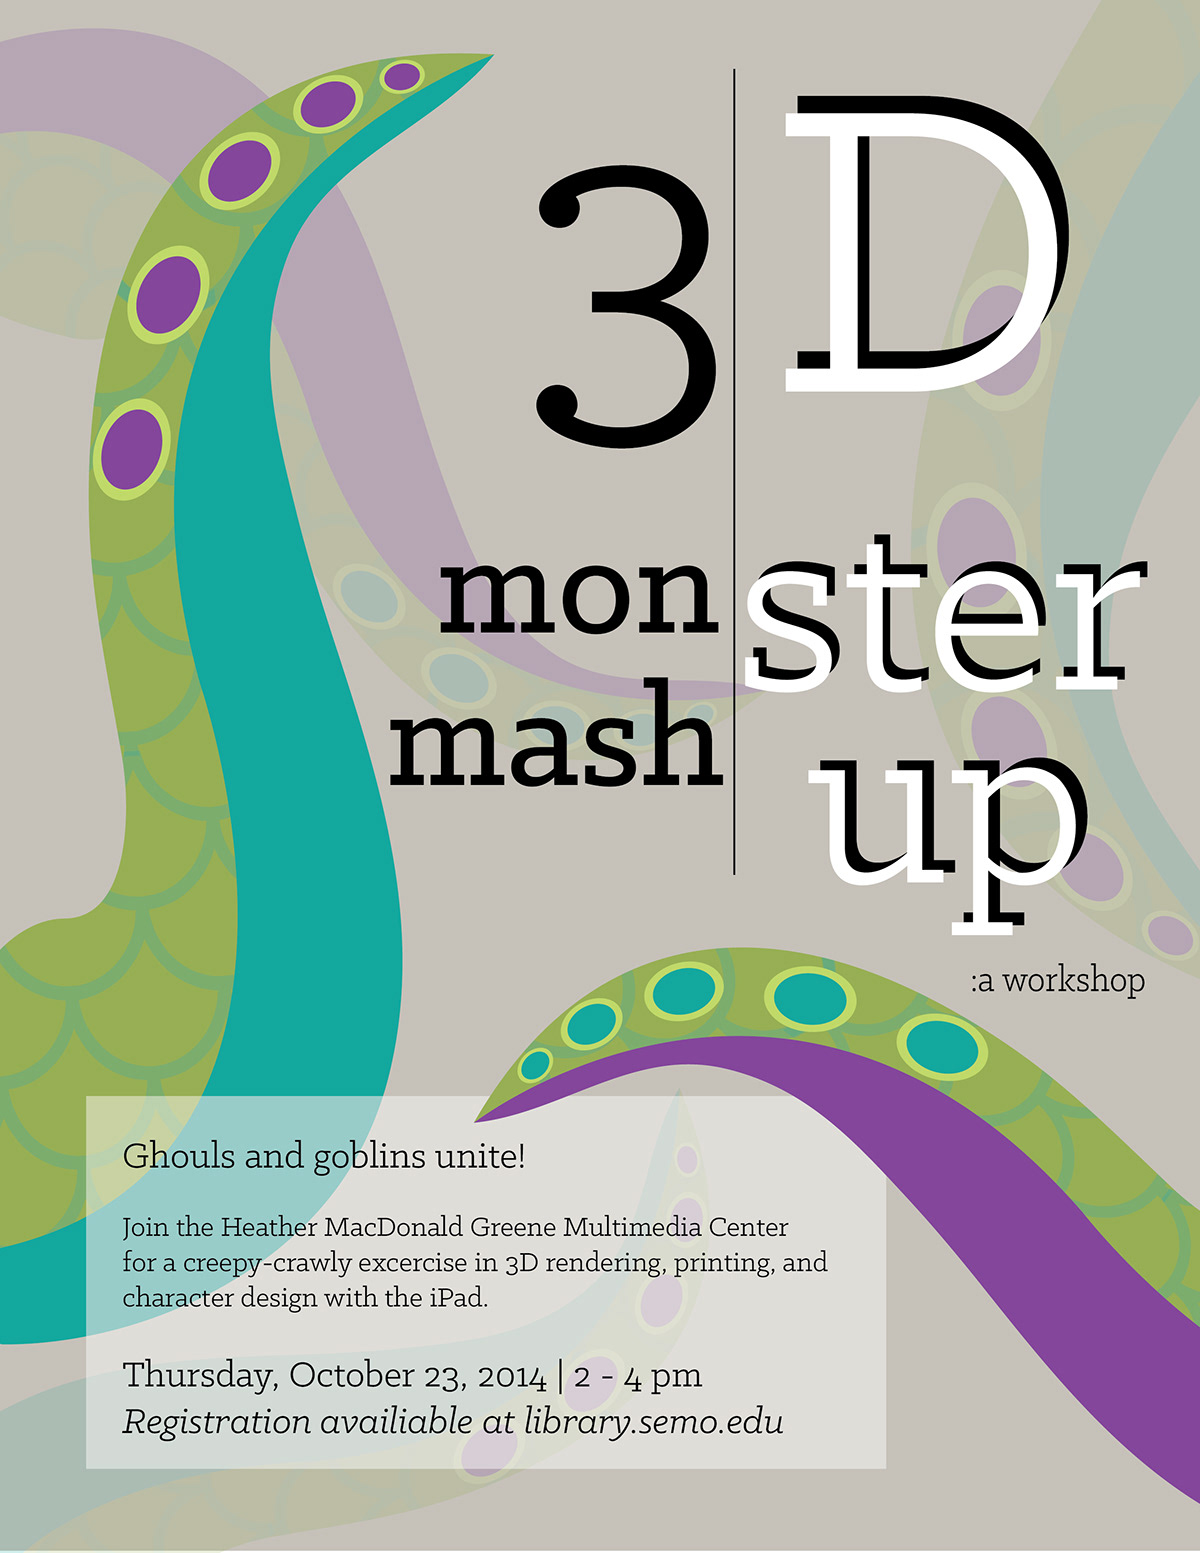 3d printing 3d letters makerbot poster Poster Design 3d Poster monster mashup tenticles purple green library Event Workshop